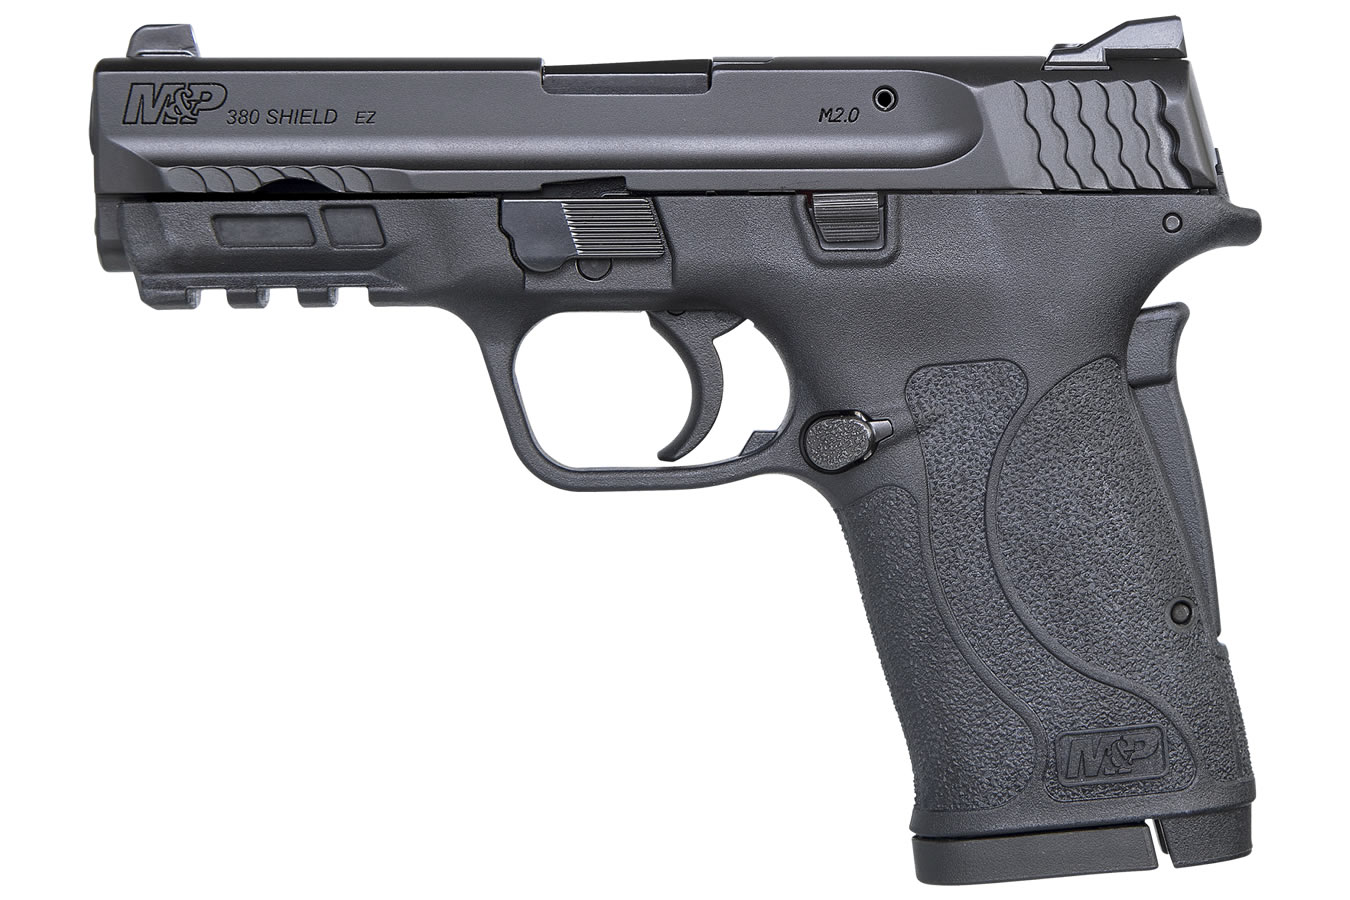 No. 6 Best Selling: SMITH AND WESSON MP380 SHIELD 380 ACP PISTOL W/ NO THUMB SAFETY